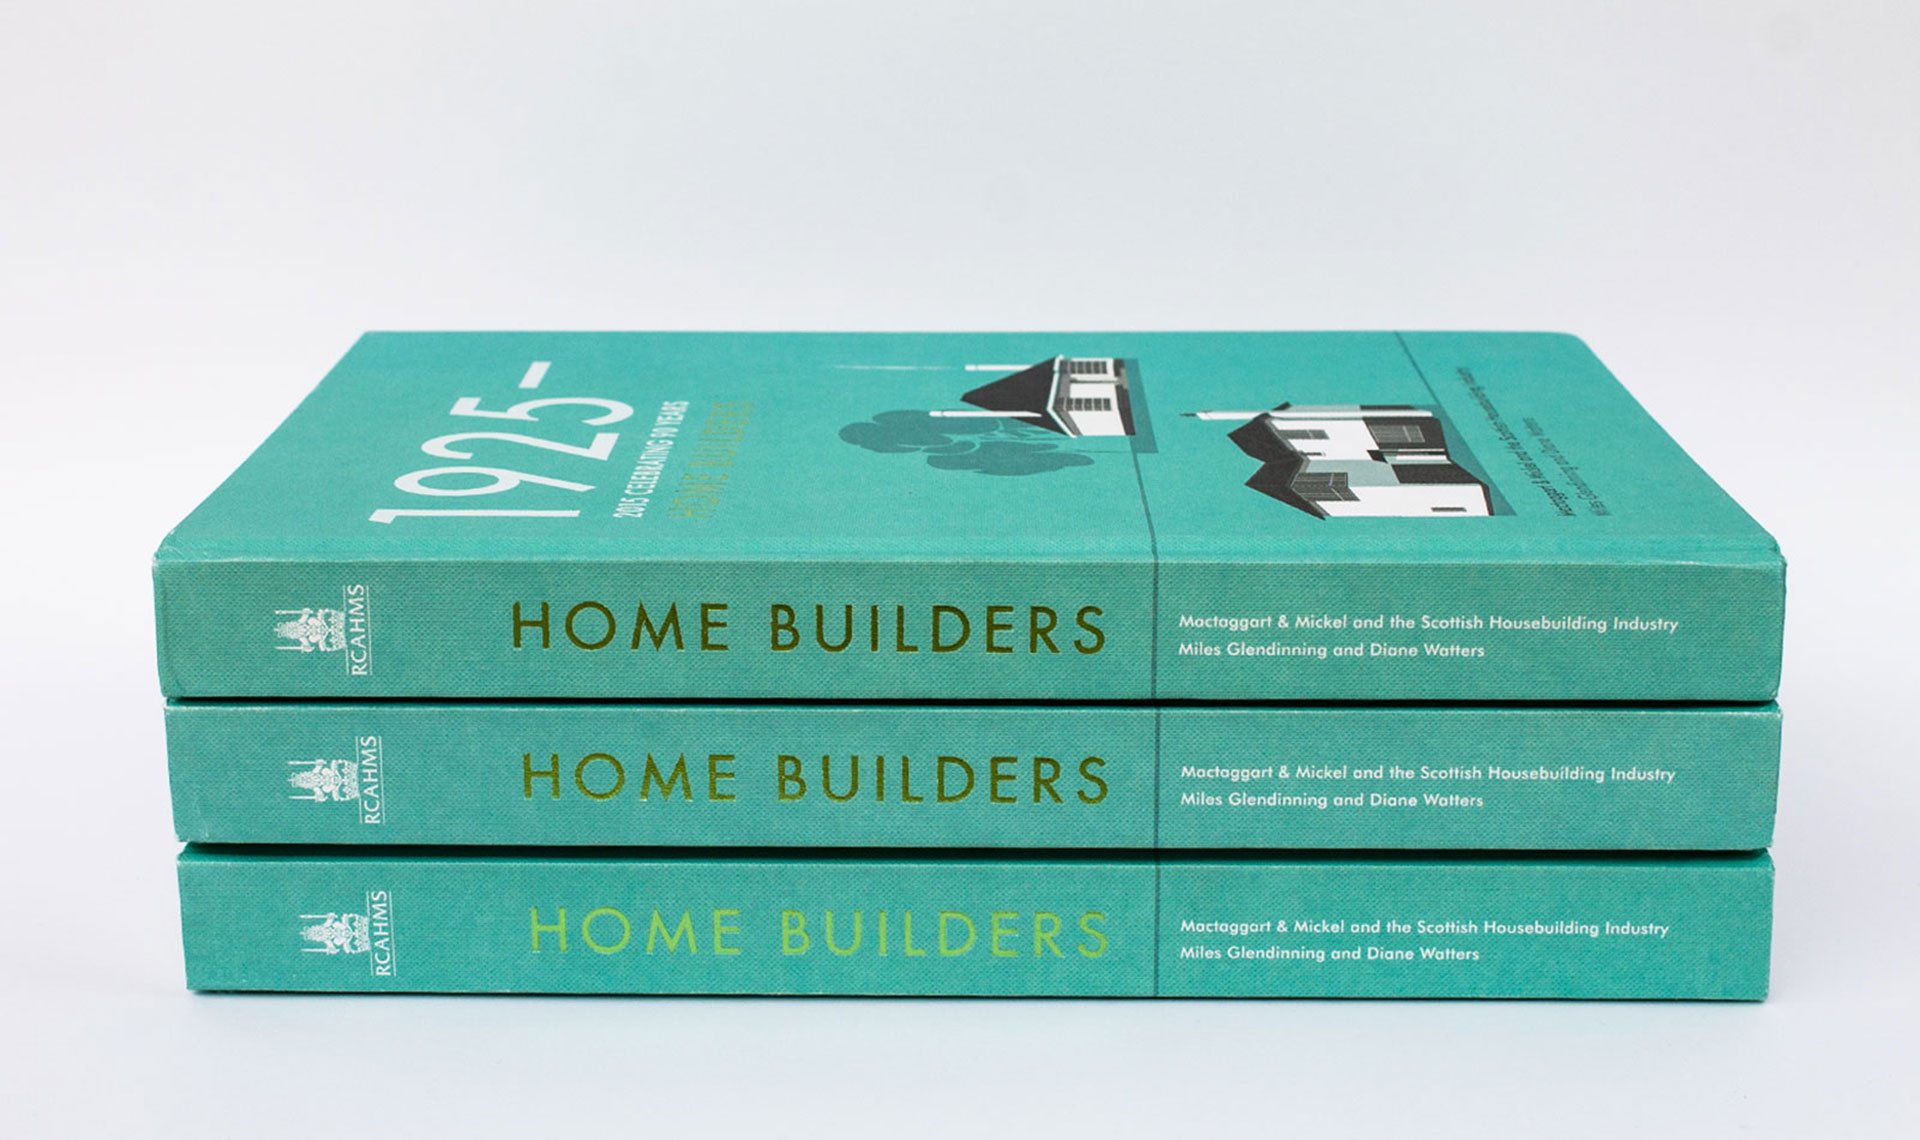 Home Builders book cover design